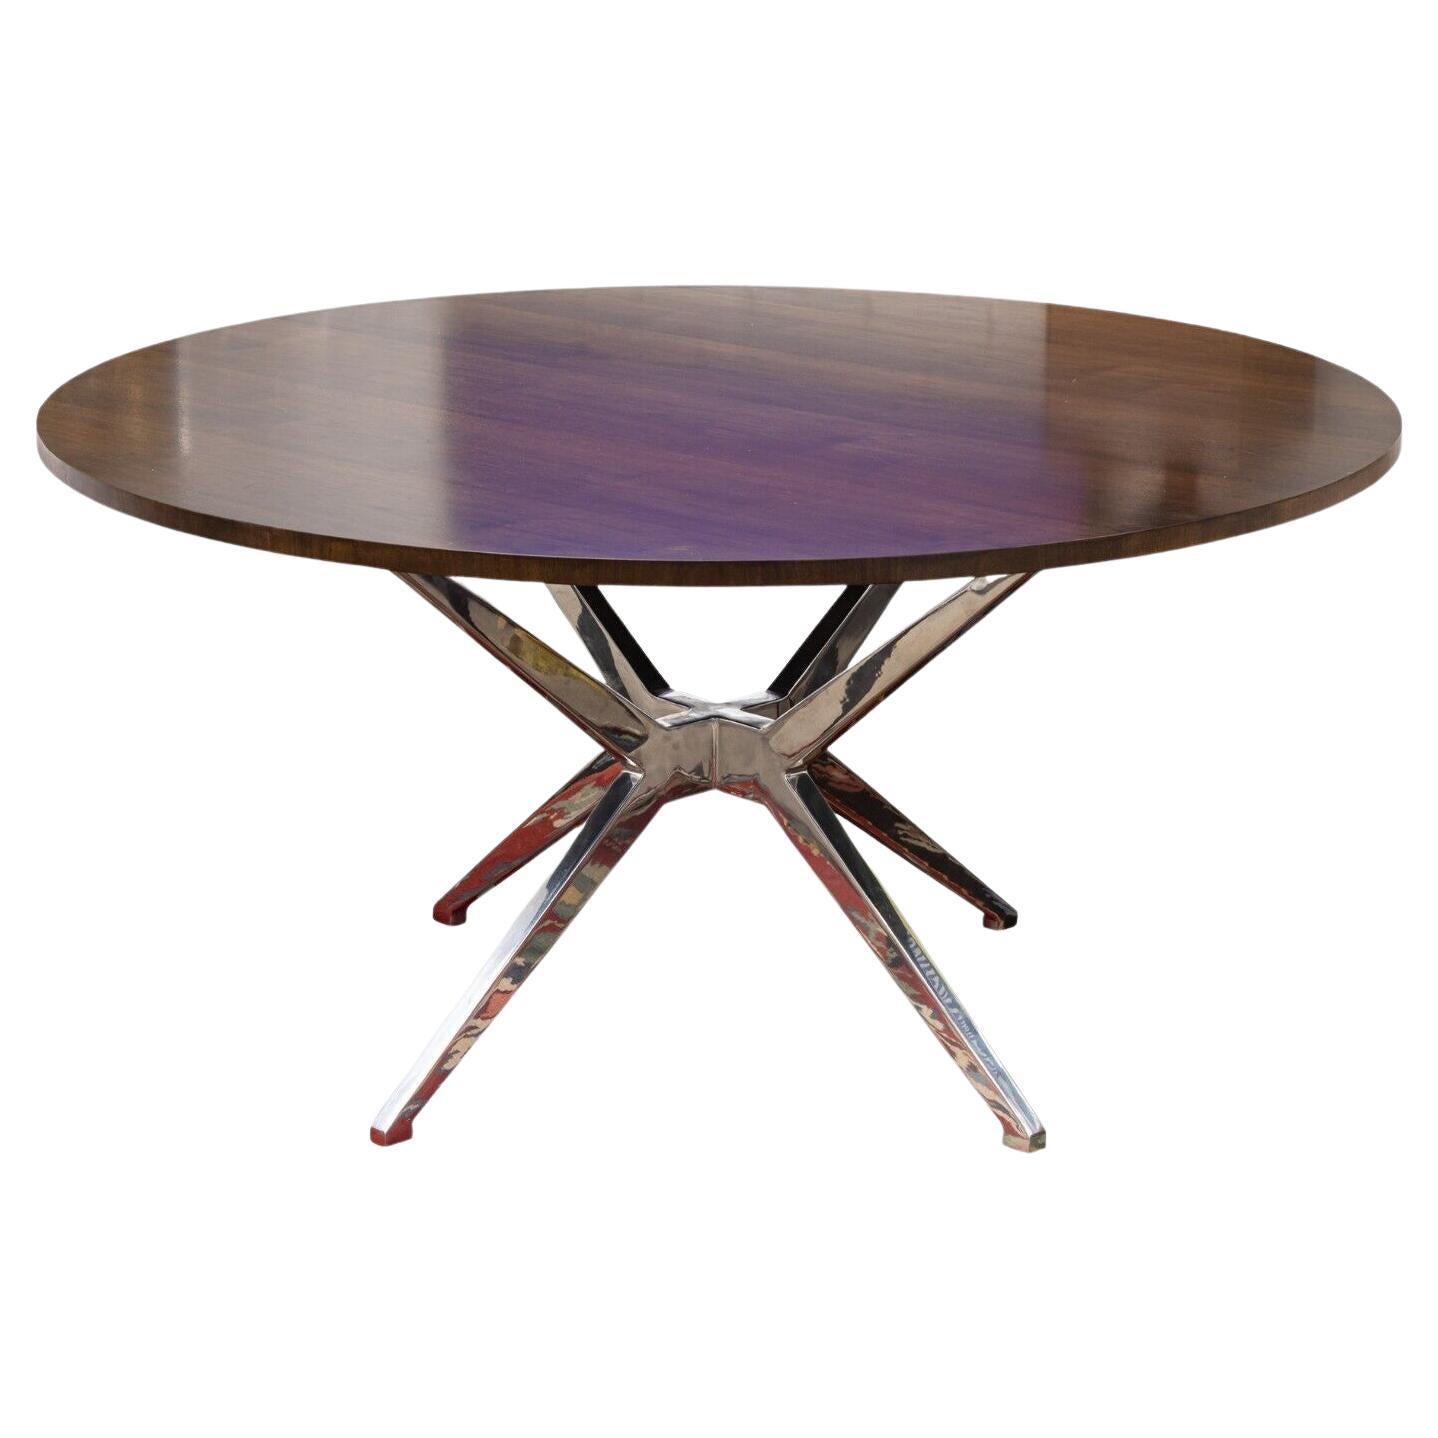 Contemporary Maslow Spider Walnut and Polished Aluminum Round Dining Room Table